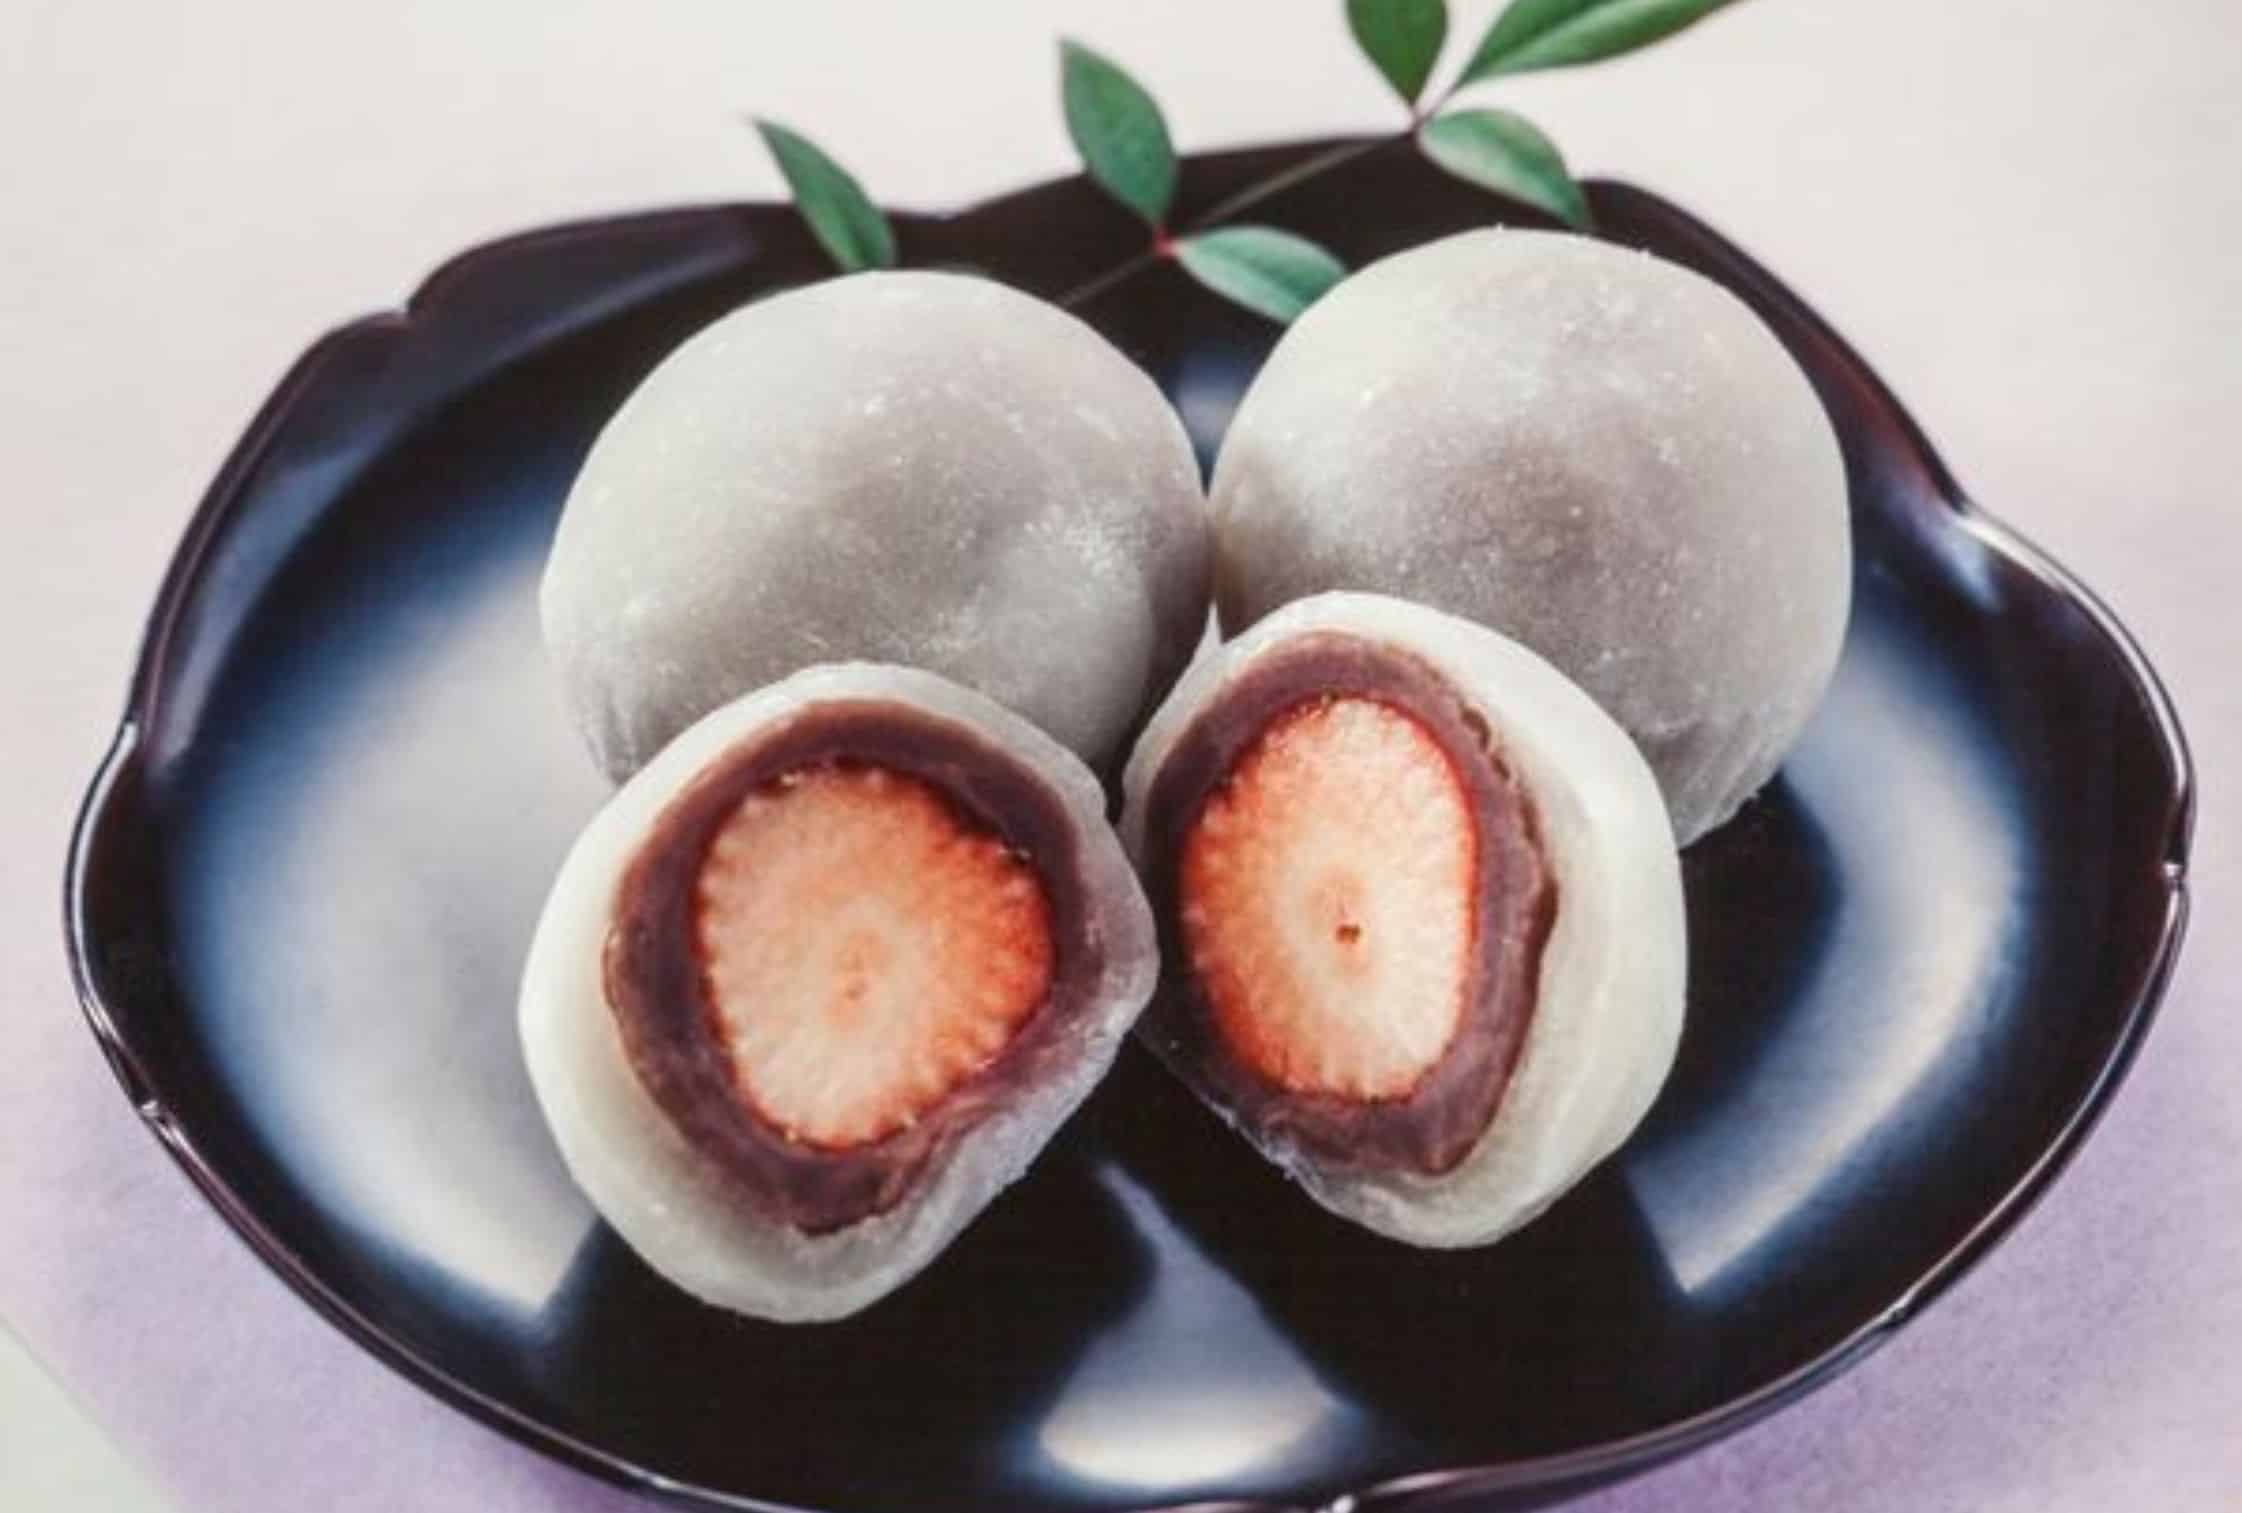 Culinary delights in Japanese winter: Japanese mochi